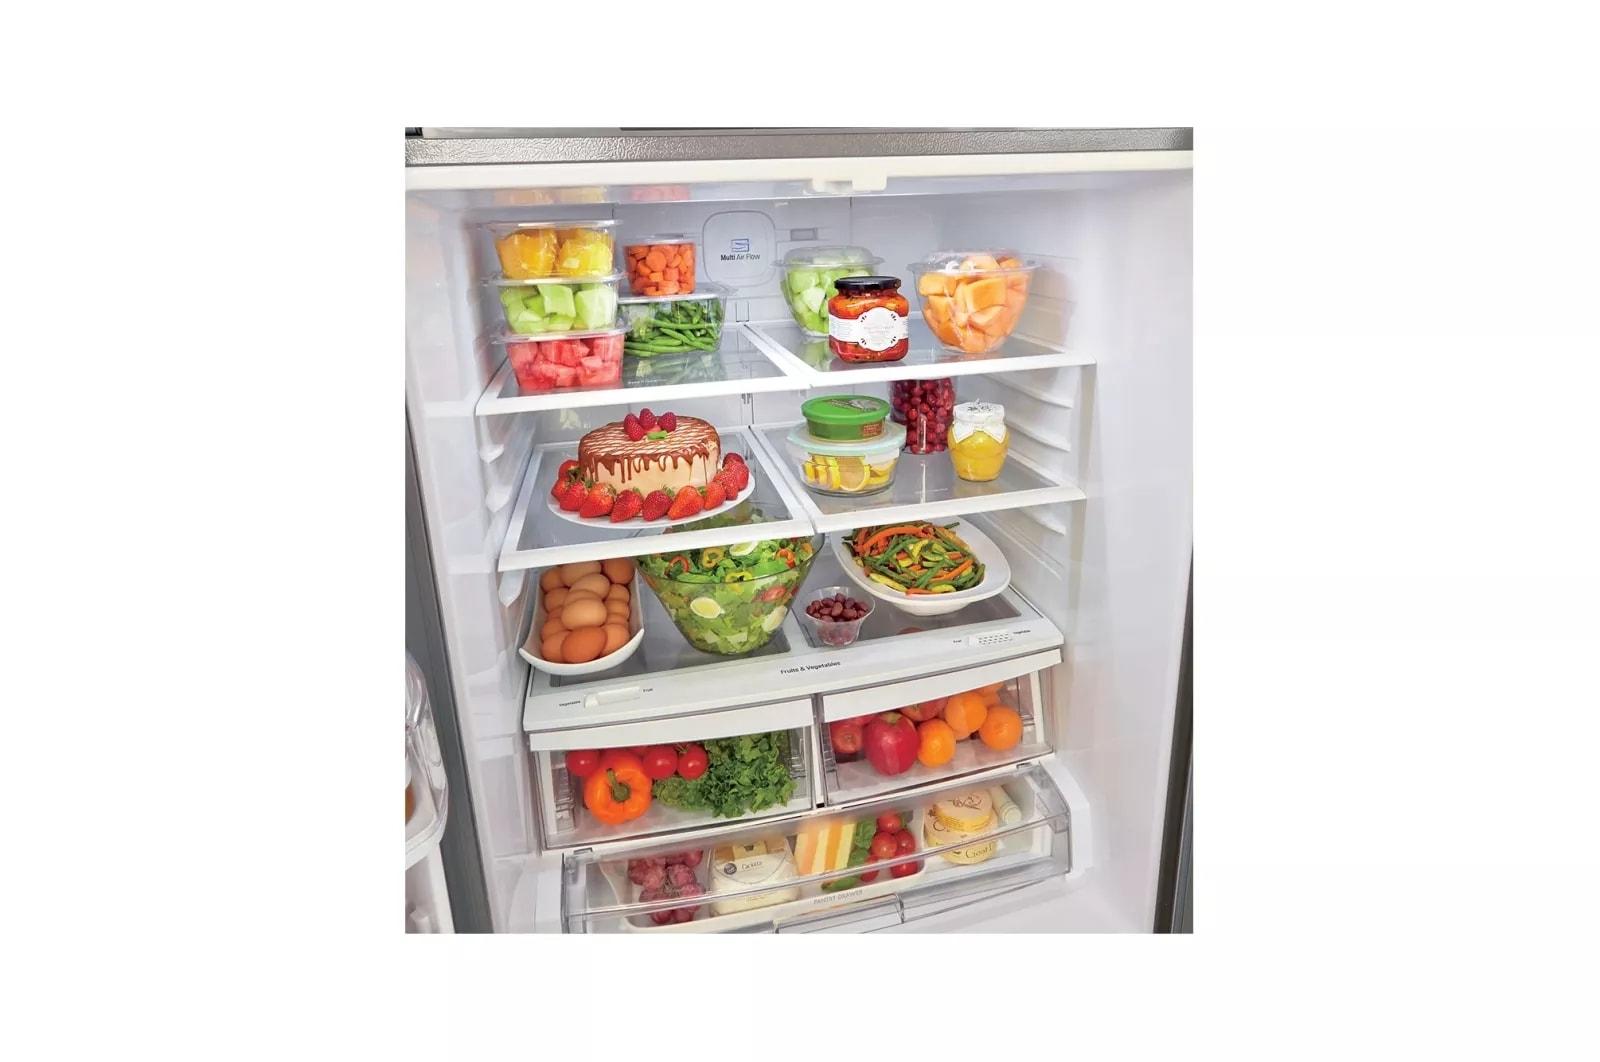 30" Wide Large Capacity 3 French Door Refrigerator - image 5 of 5